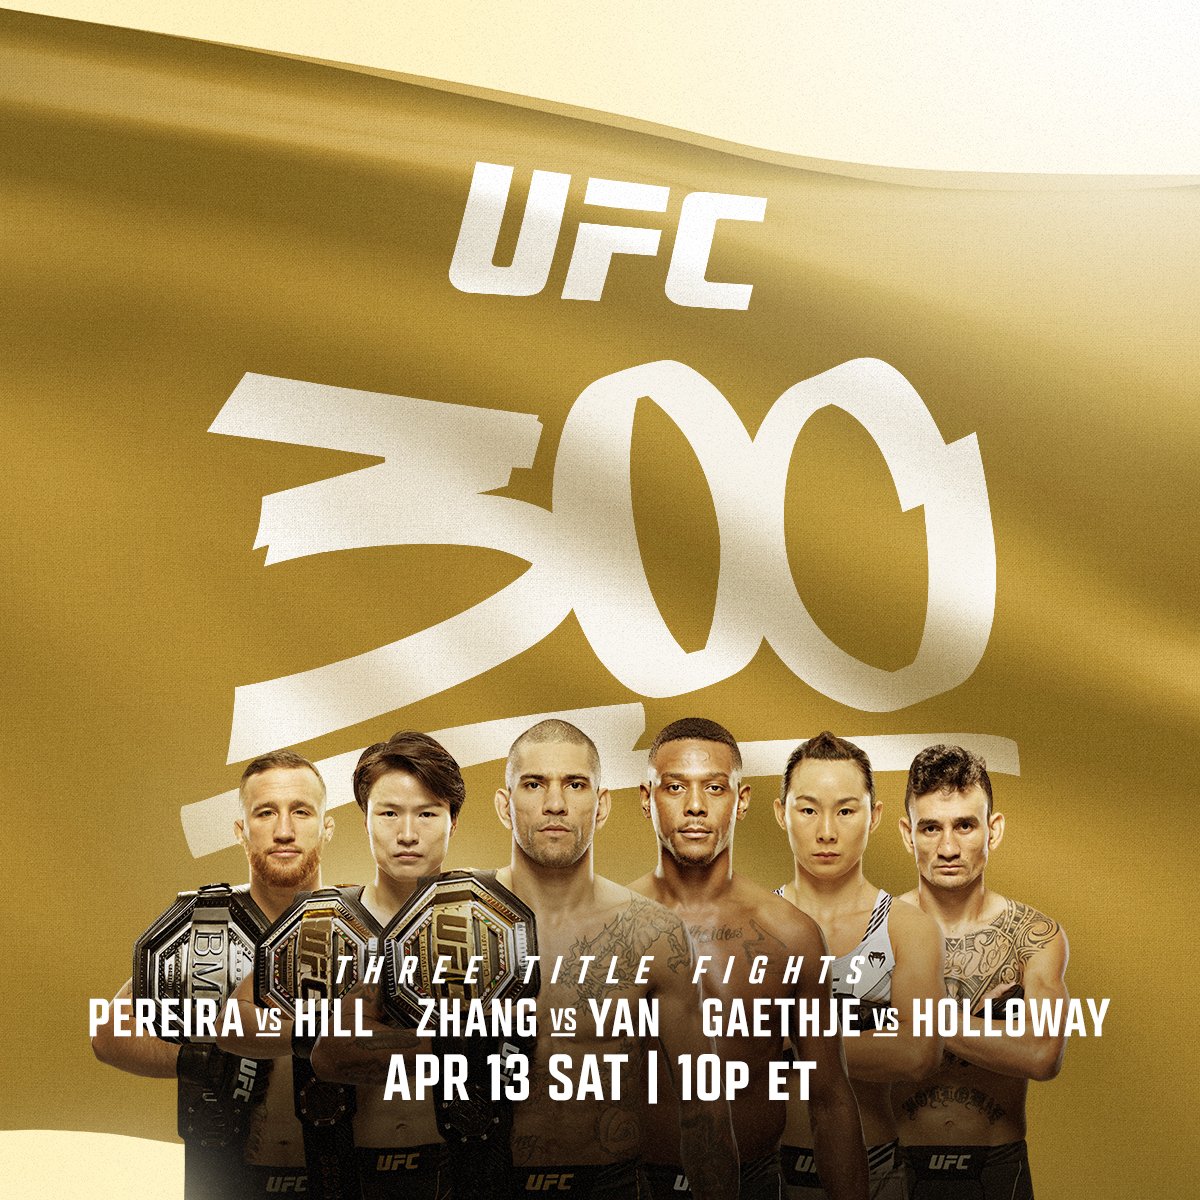 #UFC300 is showing this weekend at Corner Pub Downtown! Make sure you're there at 9 pm to catch one of the biggest #UFC fights of all time!
.
.
.
#UFC #UFC300 #FightNight #CornerPub #LocalFood #Nashville #NashvilleBar